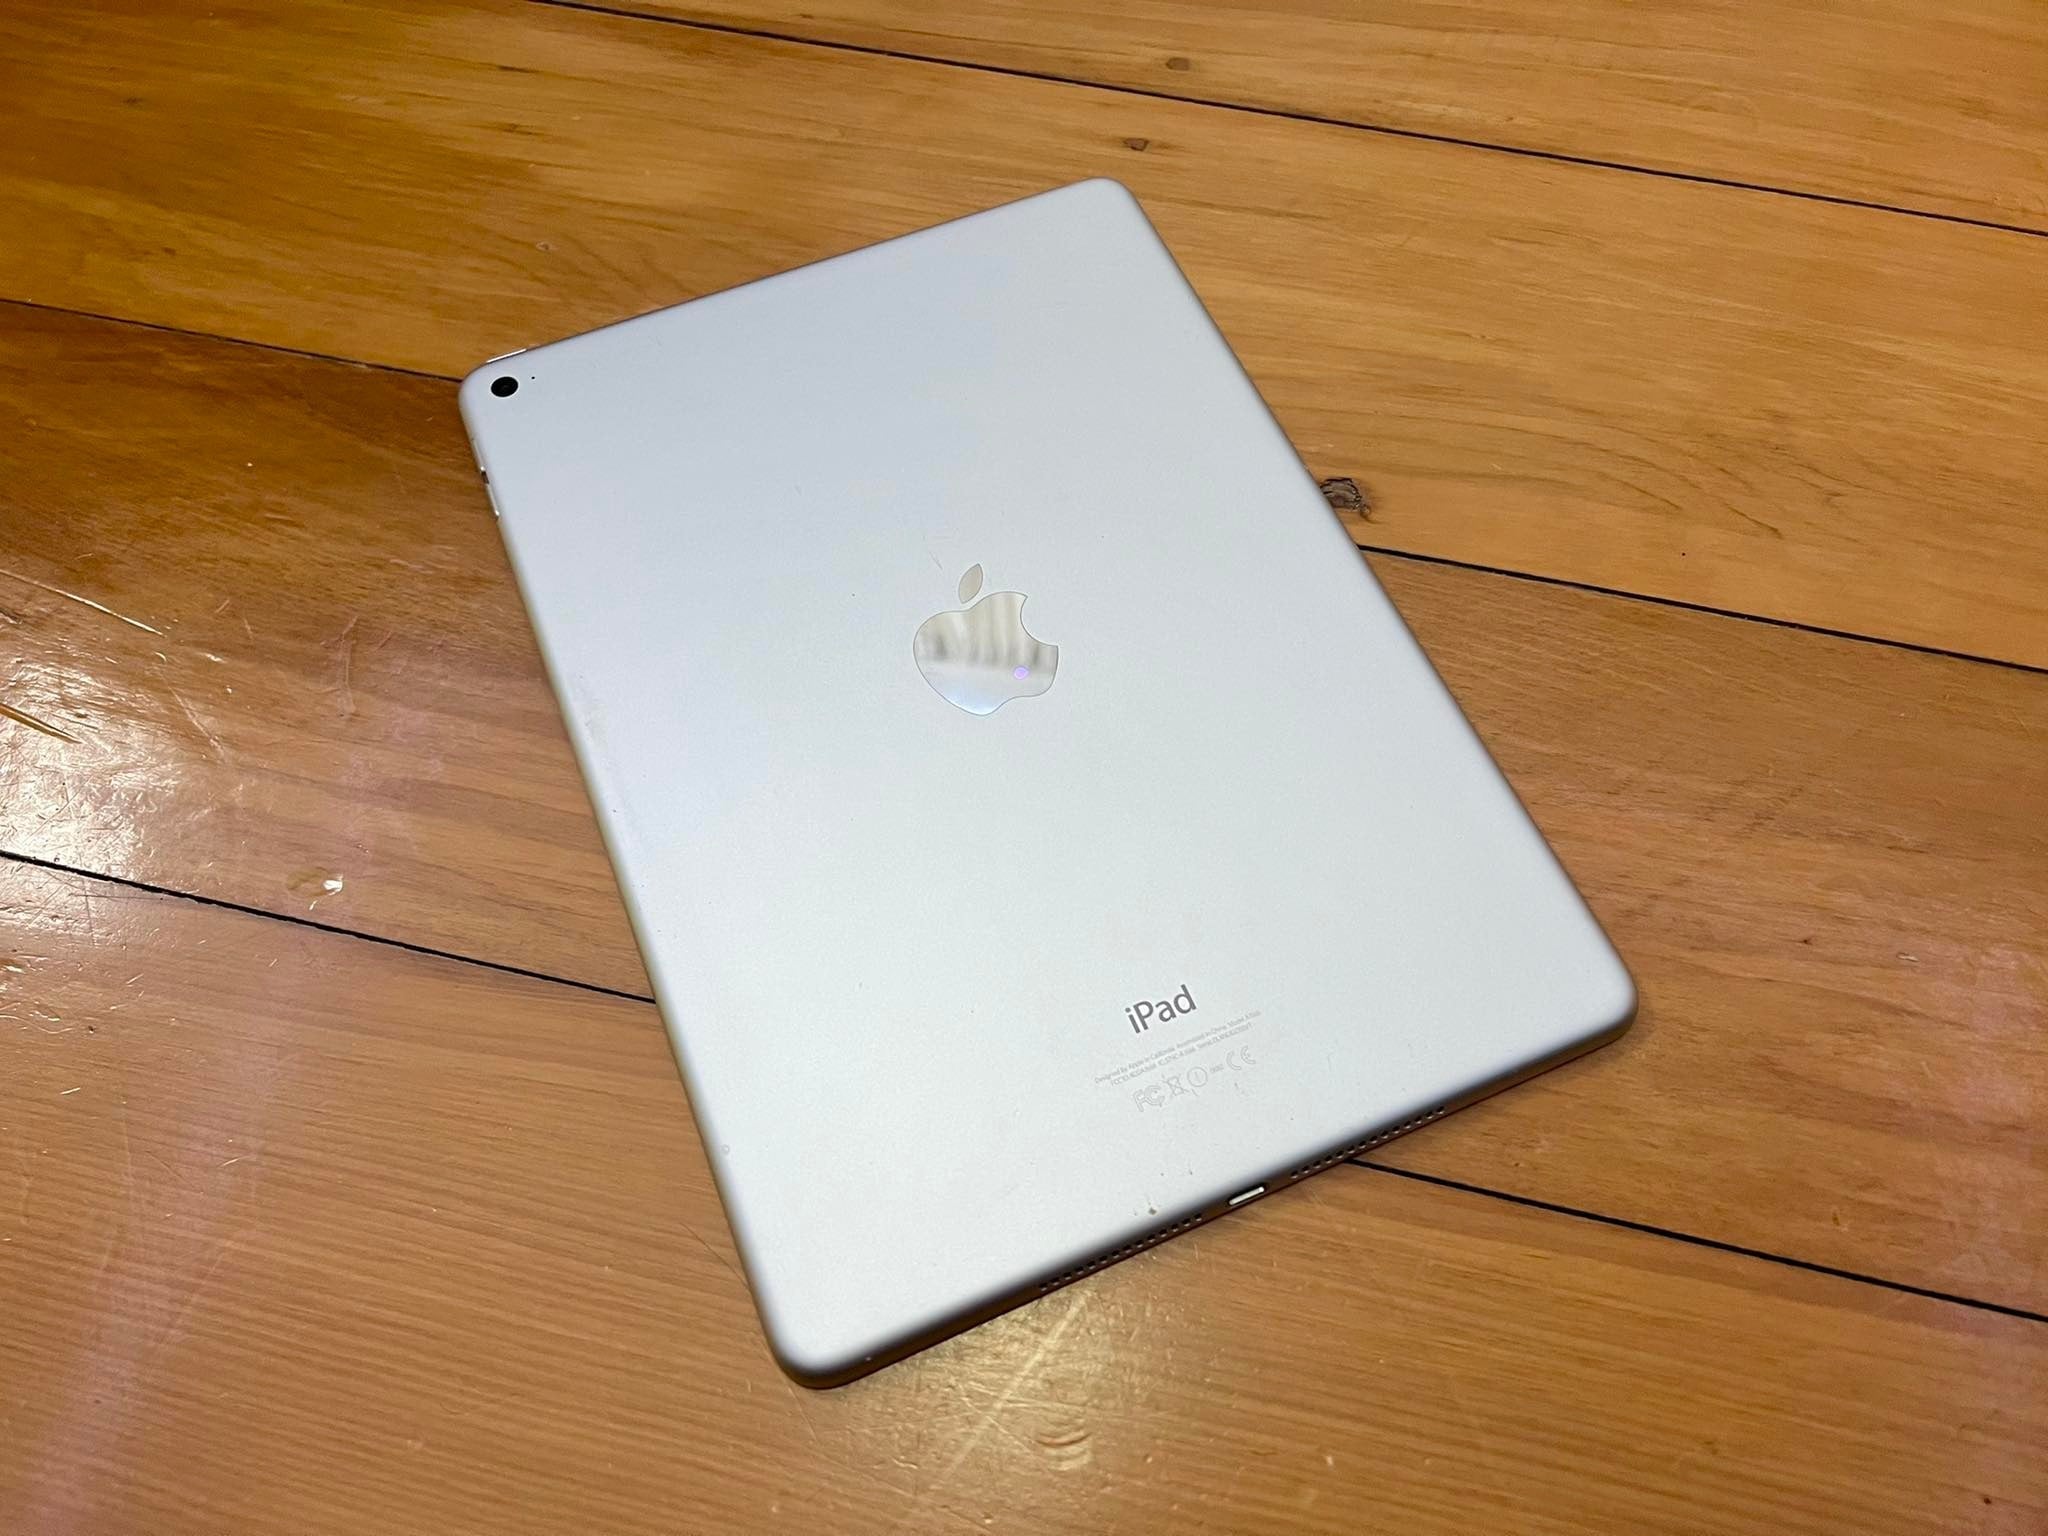 Apple iPad 5 32GB Wifi White Silver (Excellent) Free Shipping